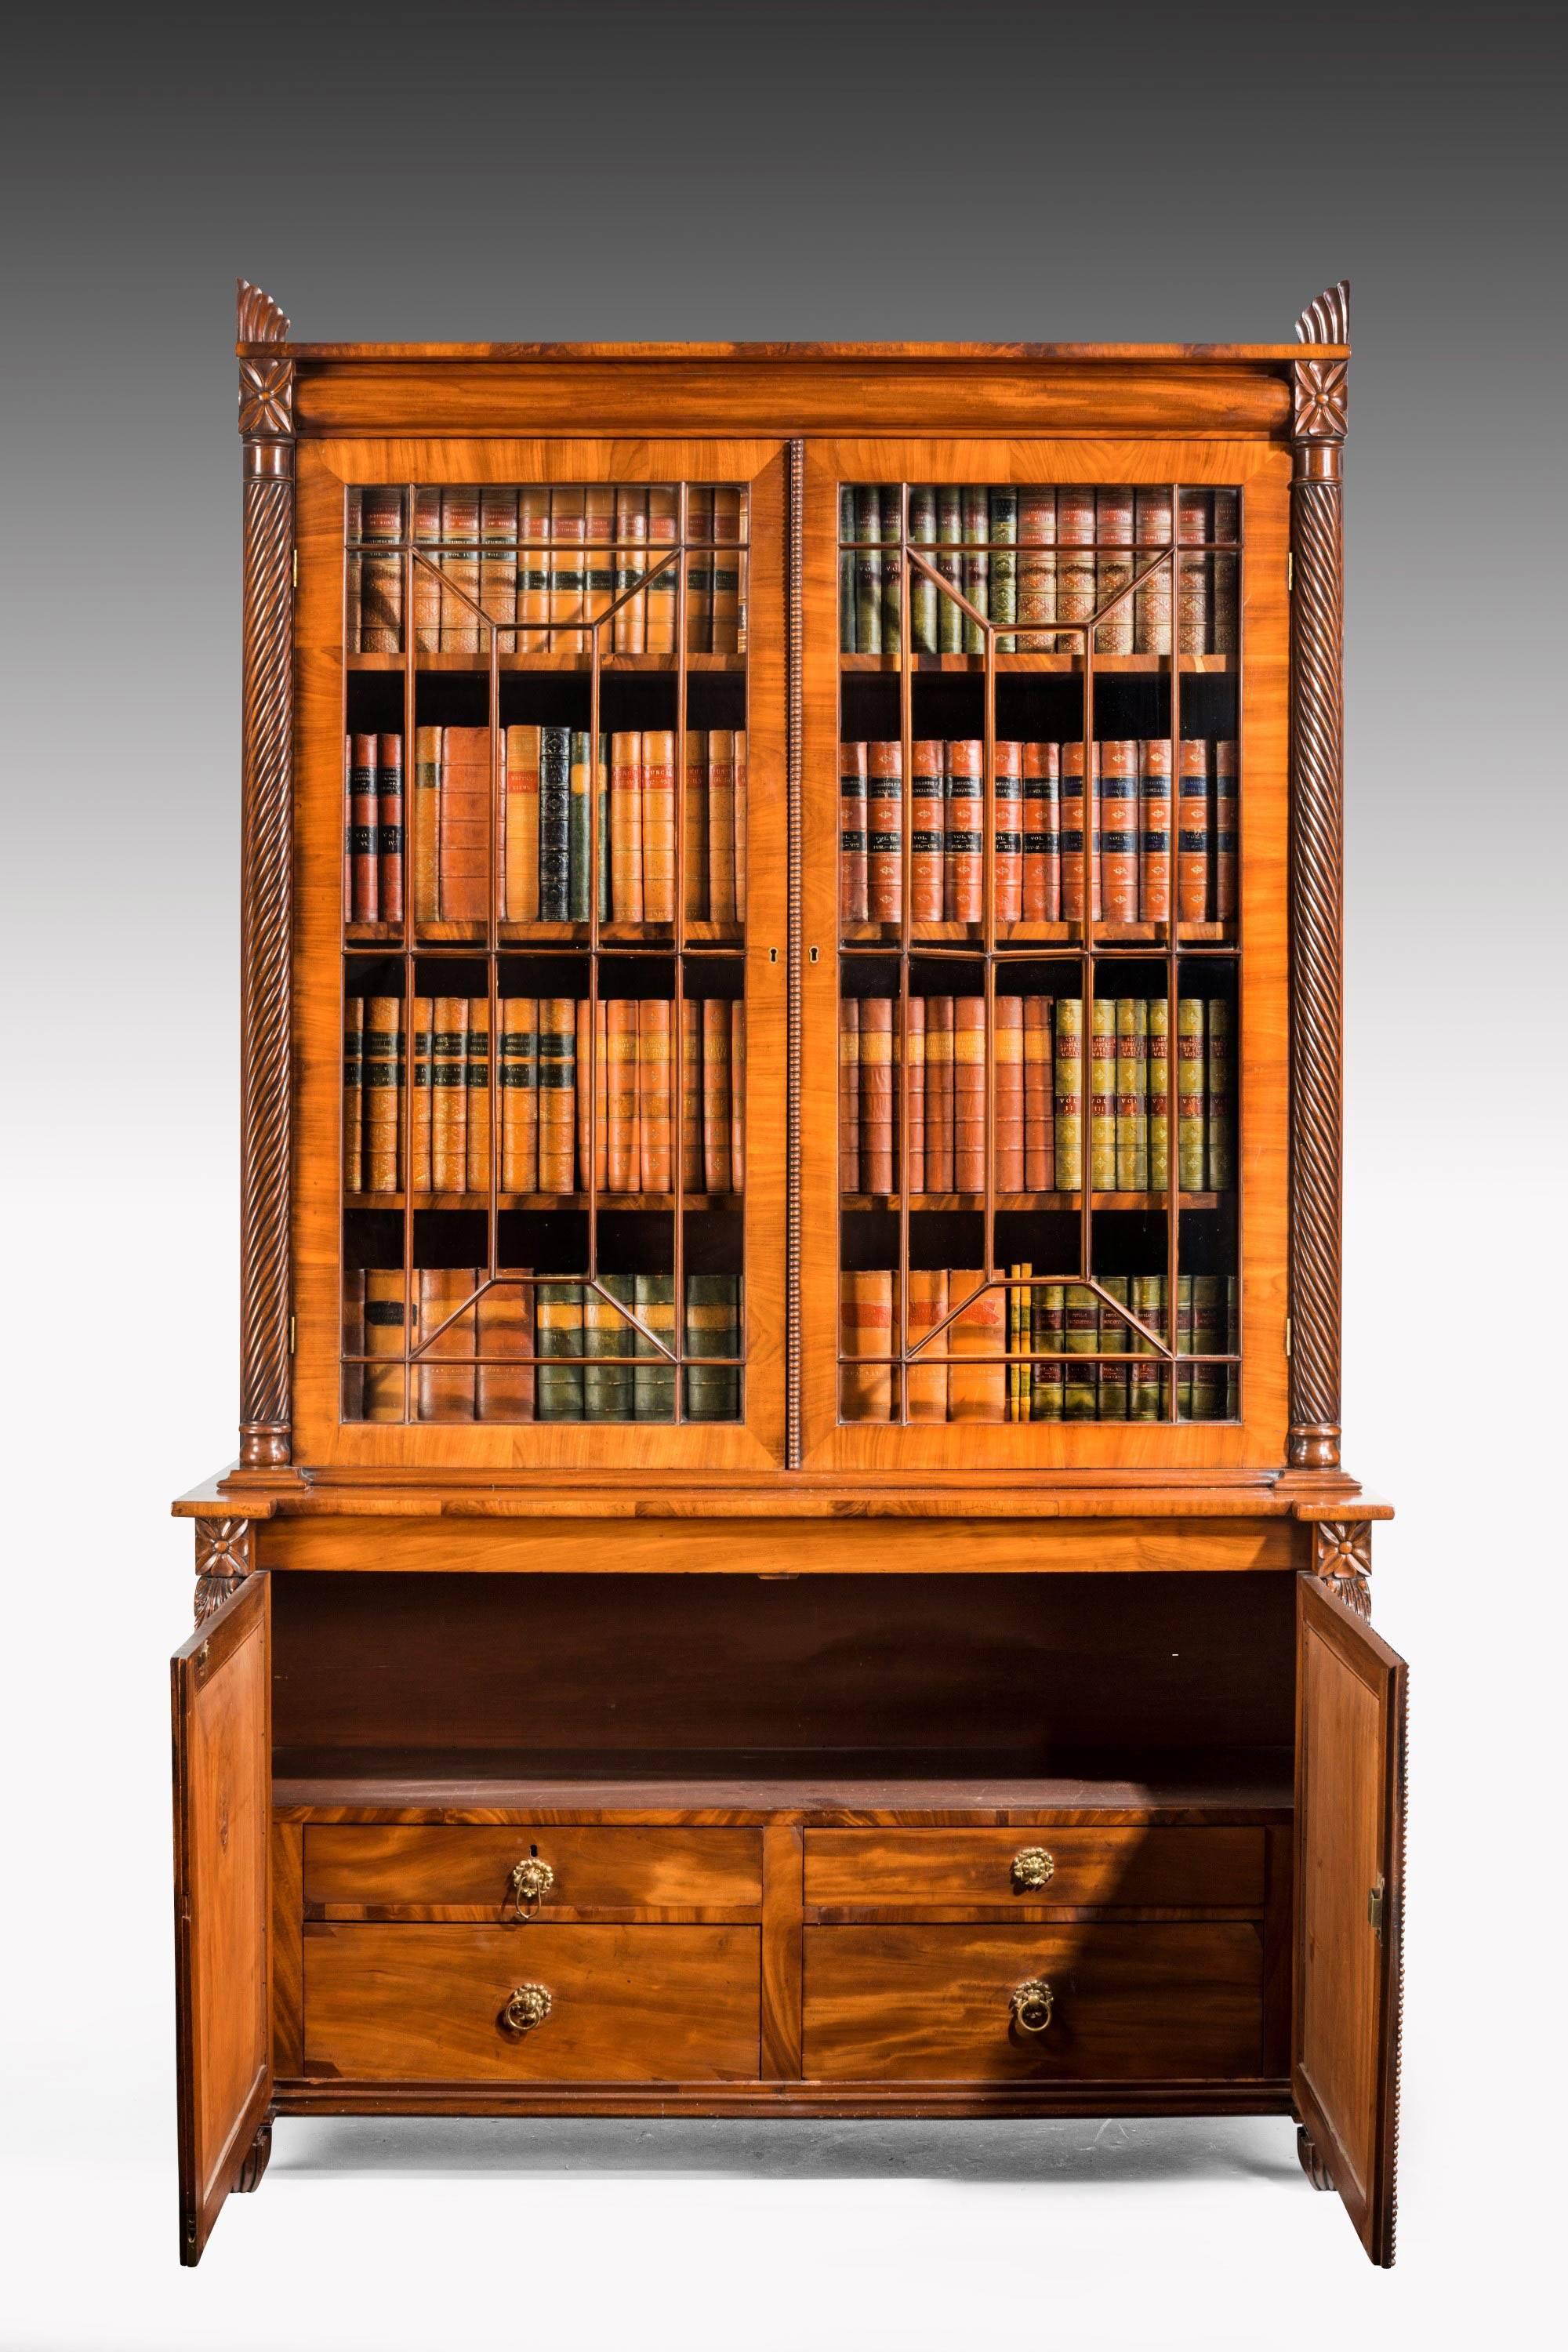 English Regency Period Mahogany Bookcase with Matching Flared Panels to the Bottom Doors